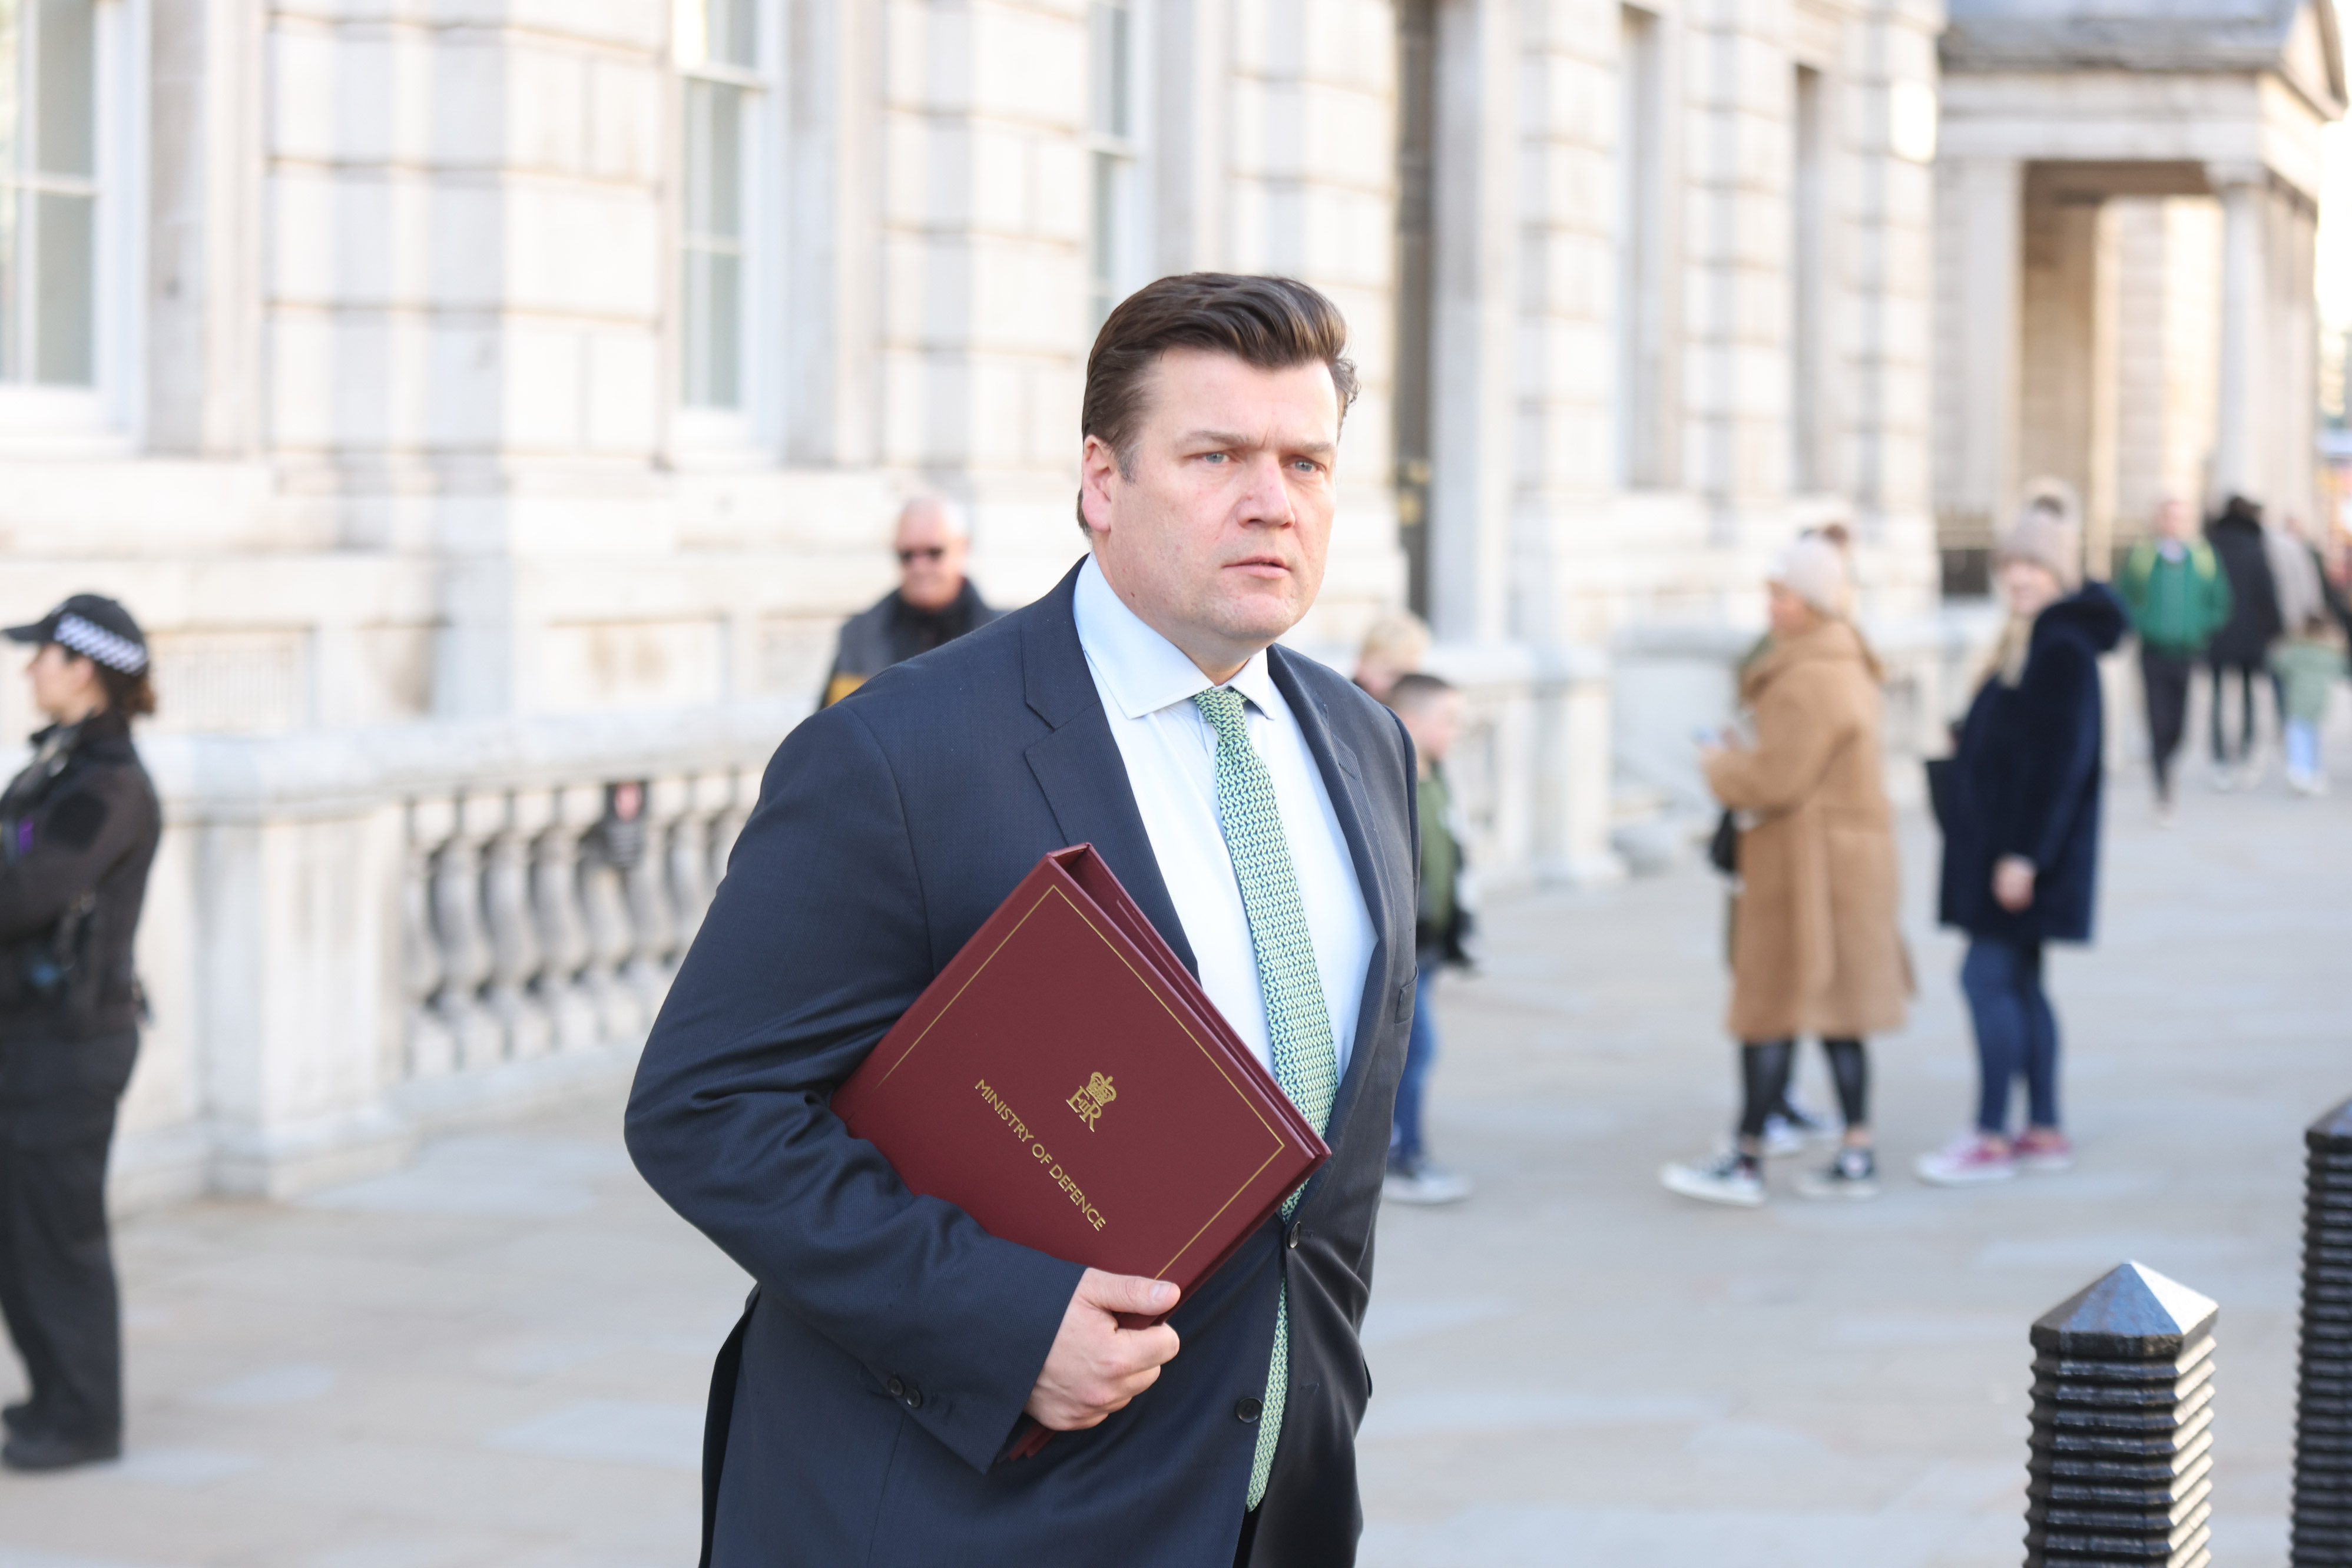 In this file photo, James Heappey, Under-Secretary of State for the Armed Forces, leaves the Cabinet Office on Whitehall on February 17.